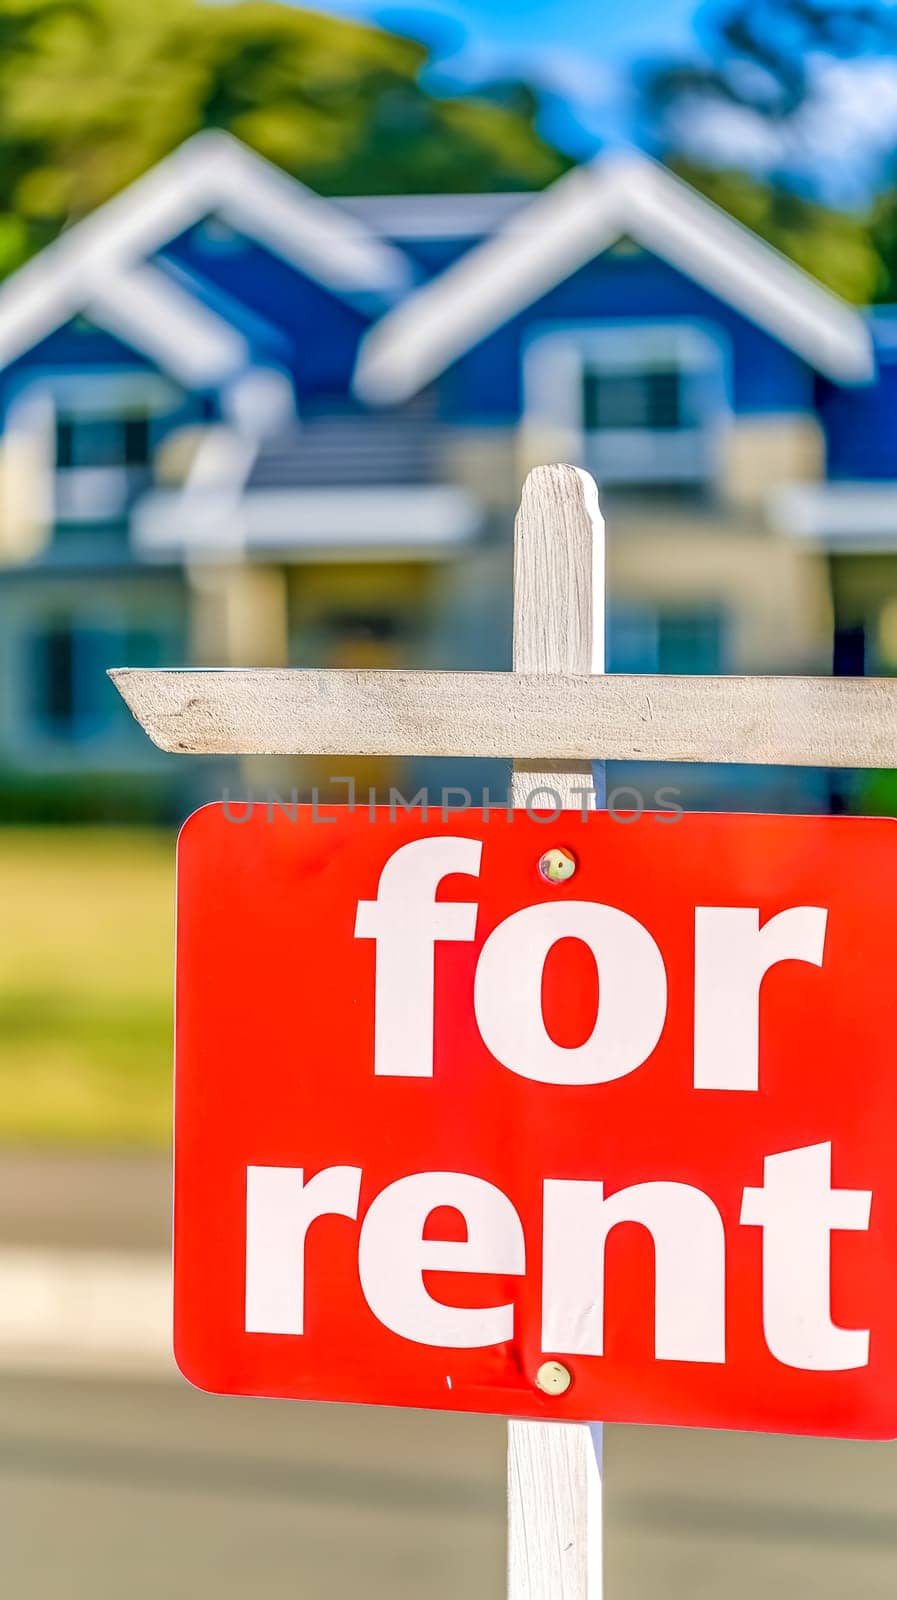 sign with the words For Rent prominently displayed in bold lettering, set against a background of a blurred house, creating a clear visual indication of a property or space available for rent by Edophoto